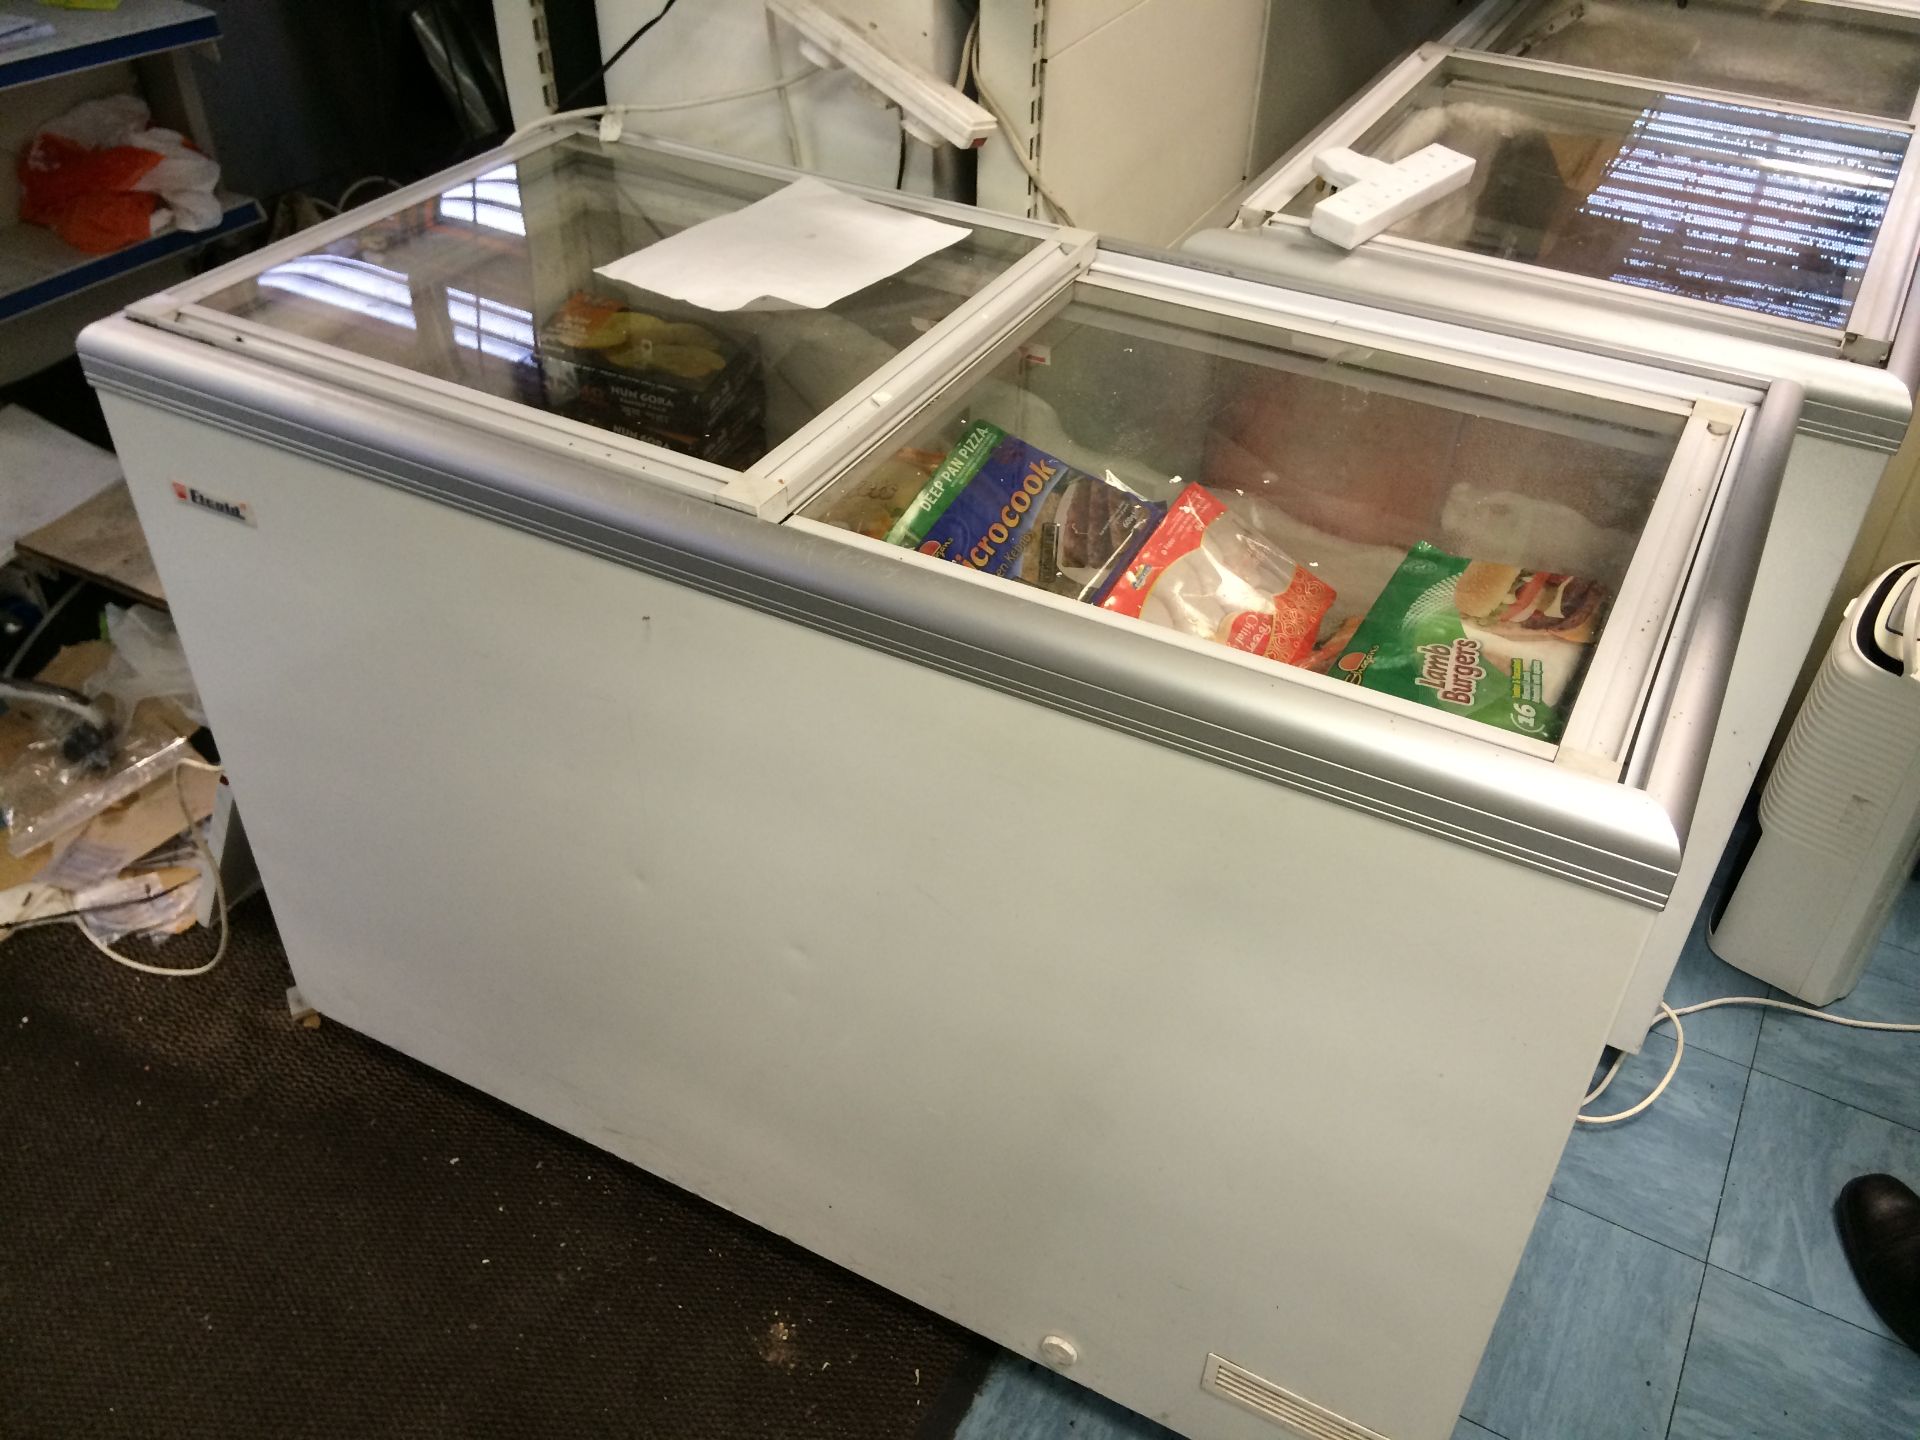 Elcold Shop Freezer With Sliding Top Approx 5 x 2 feet Containing About 50 Packs Of Frozen Food